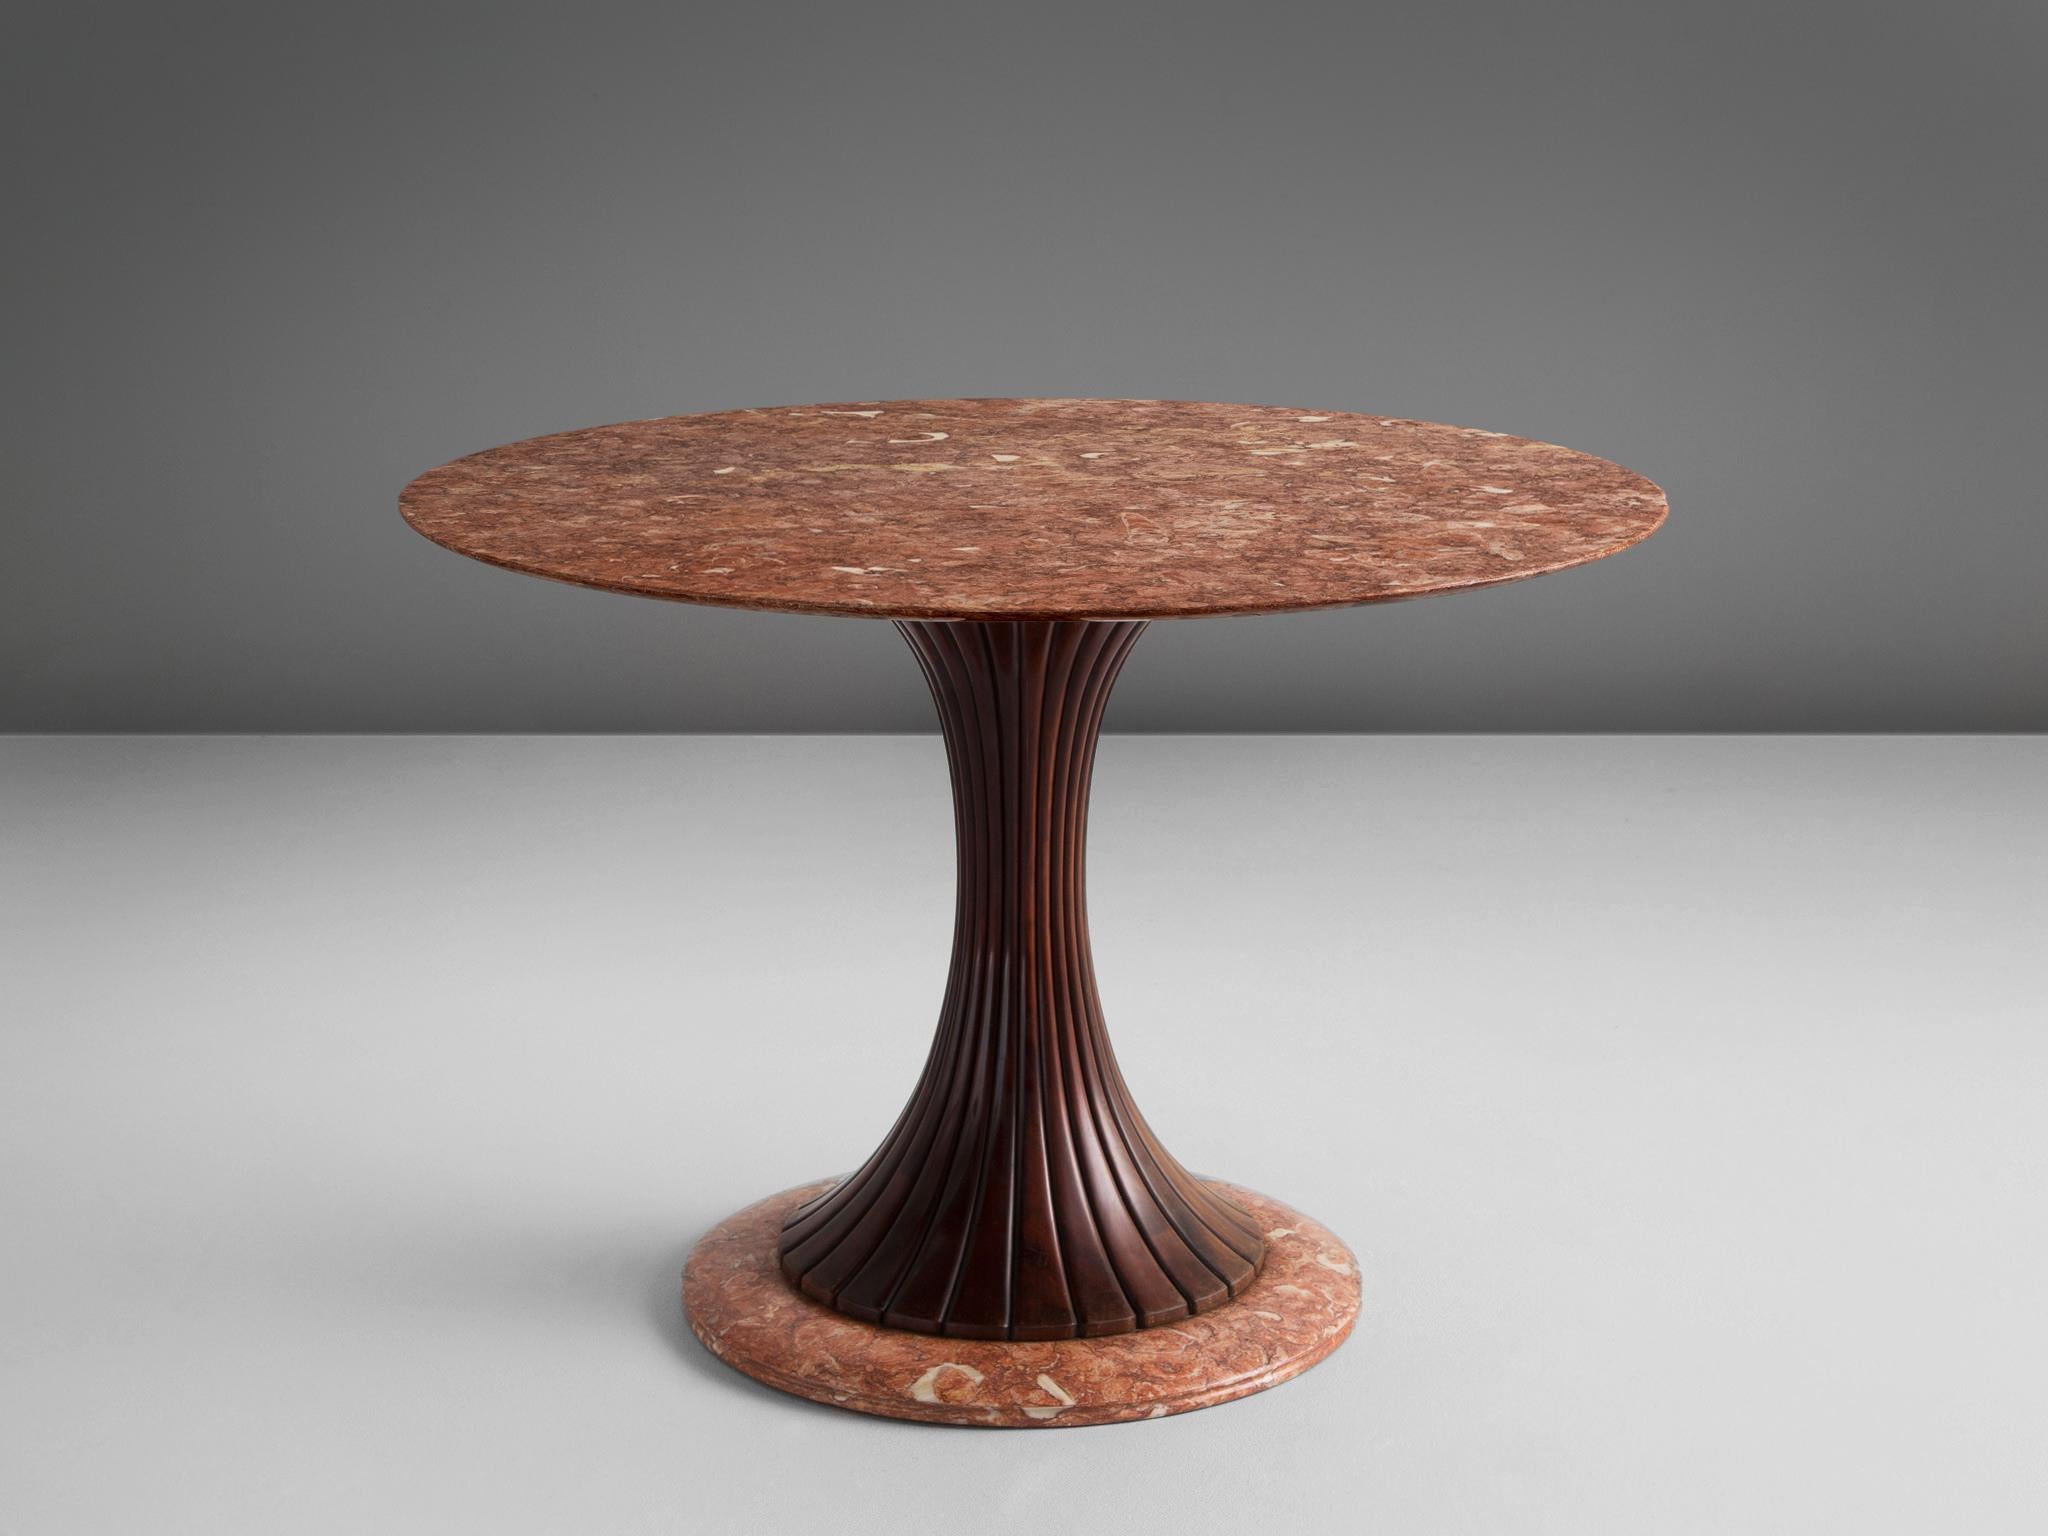 Osvaldo Borsani for Arredamento Borsani, marble wood, Italy, 1950s.

This distinctive centre table is made in the 1950s and holds a wooden decorated shaft. The main feature of this table is the red marble-top. The white and grey veins give a